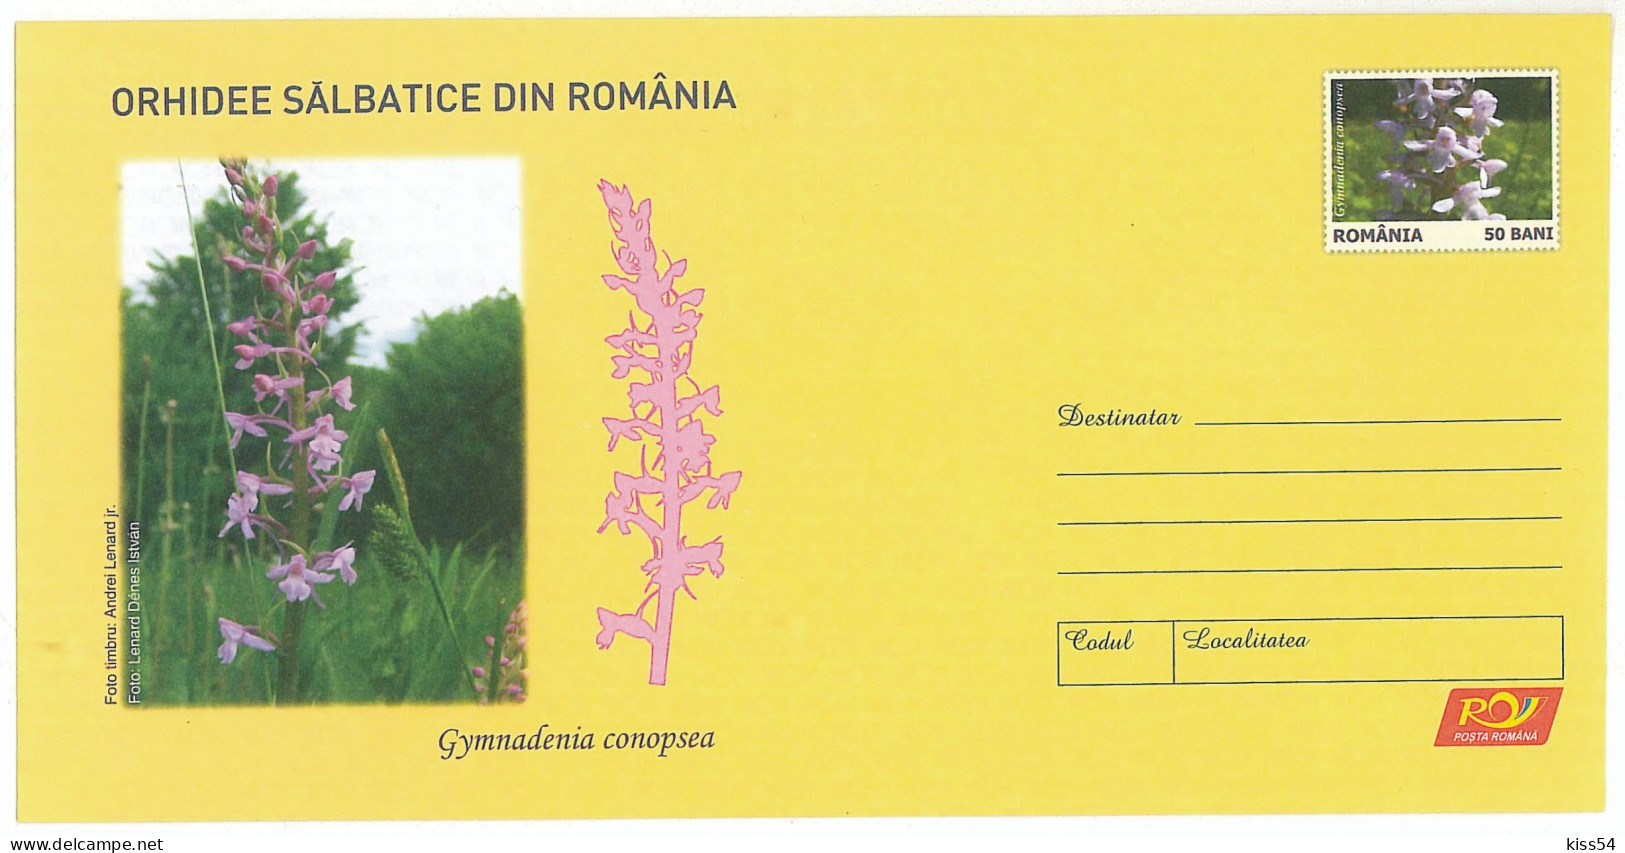 IP 2007 - 20 ORCHID, Romania - Stationery - Unused - 2007 - Orchids